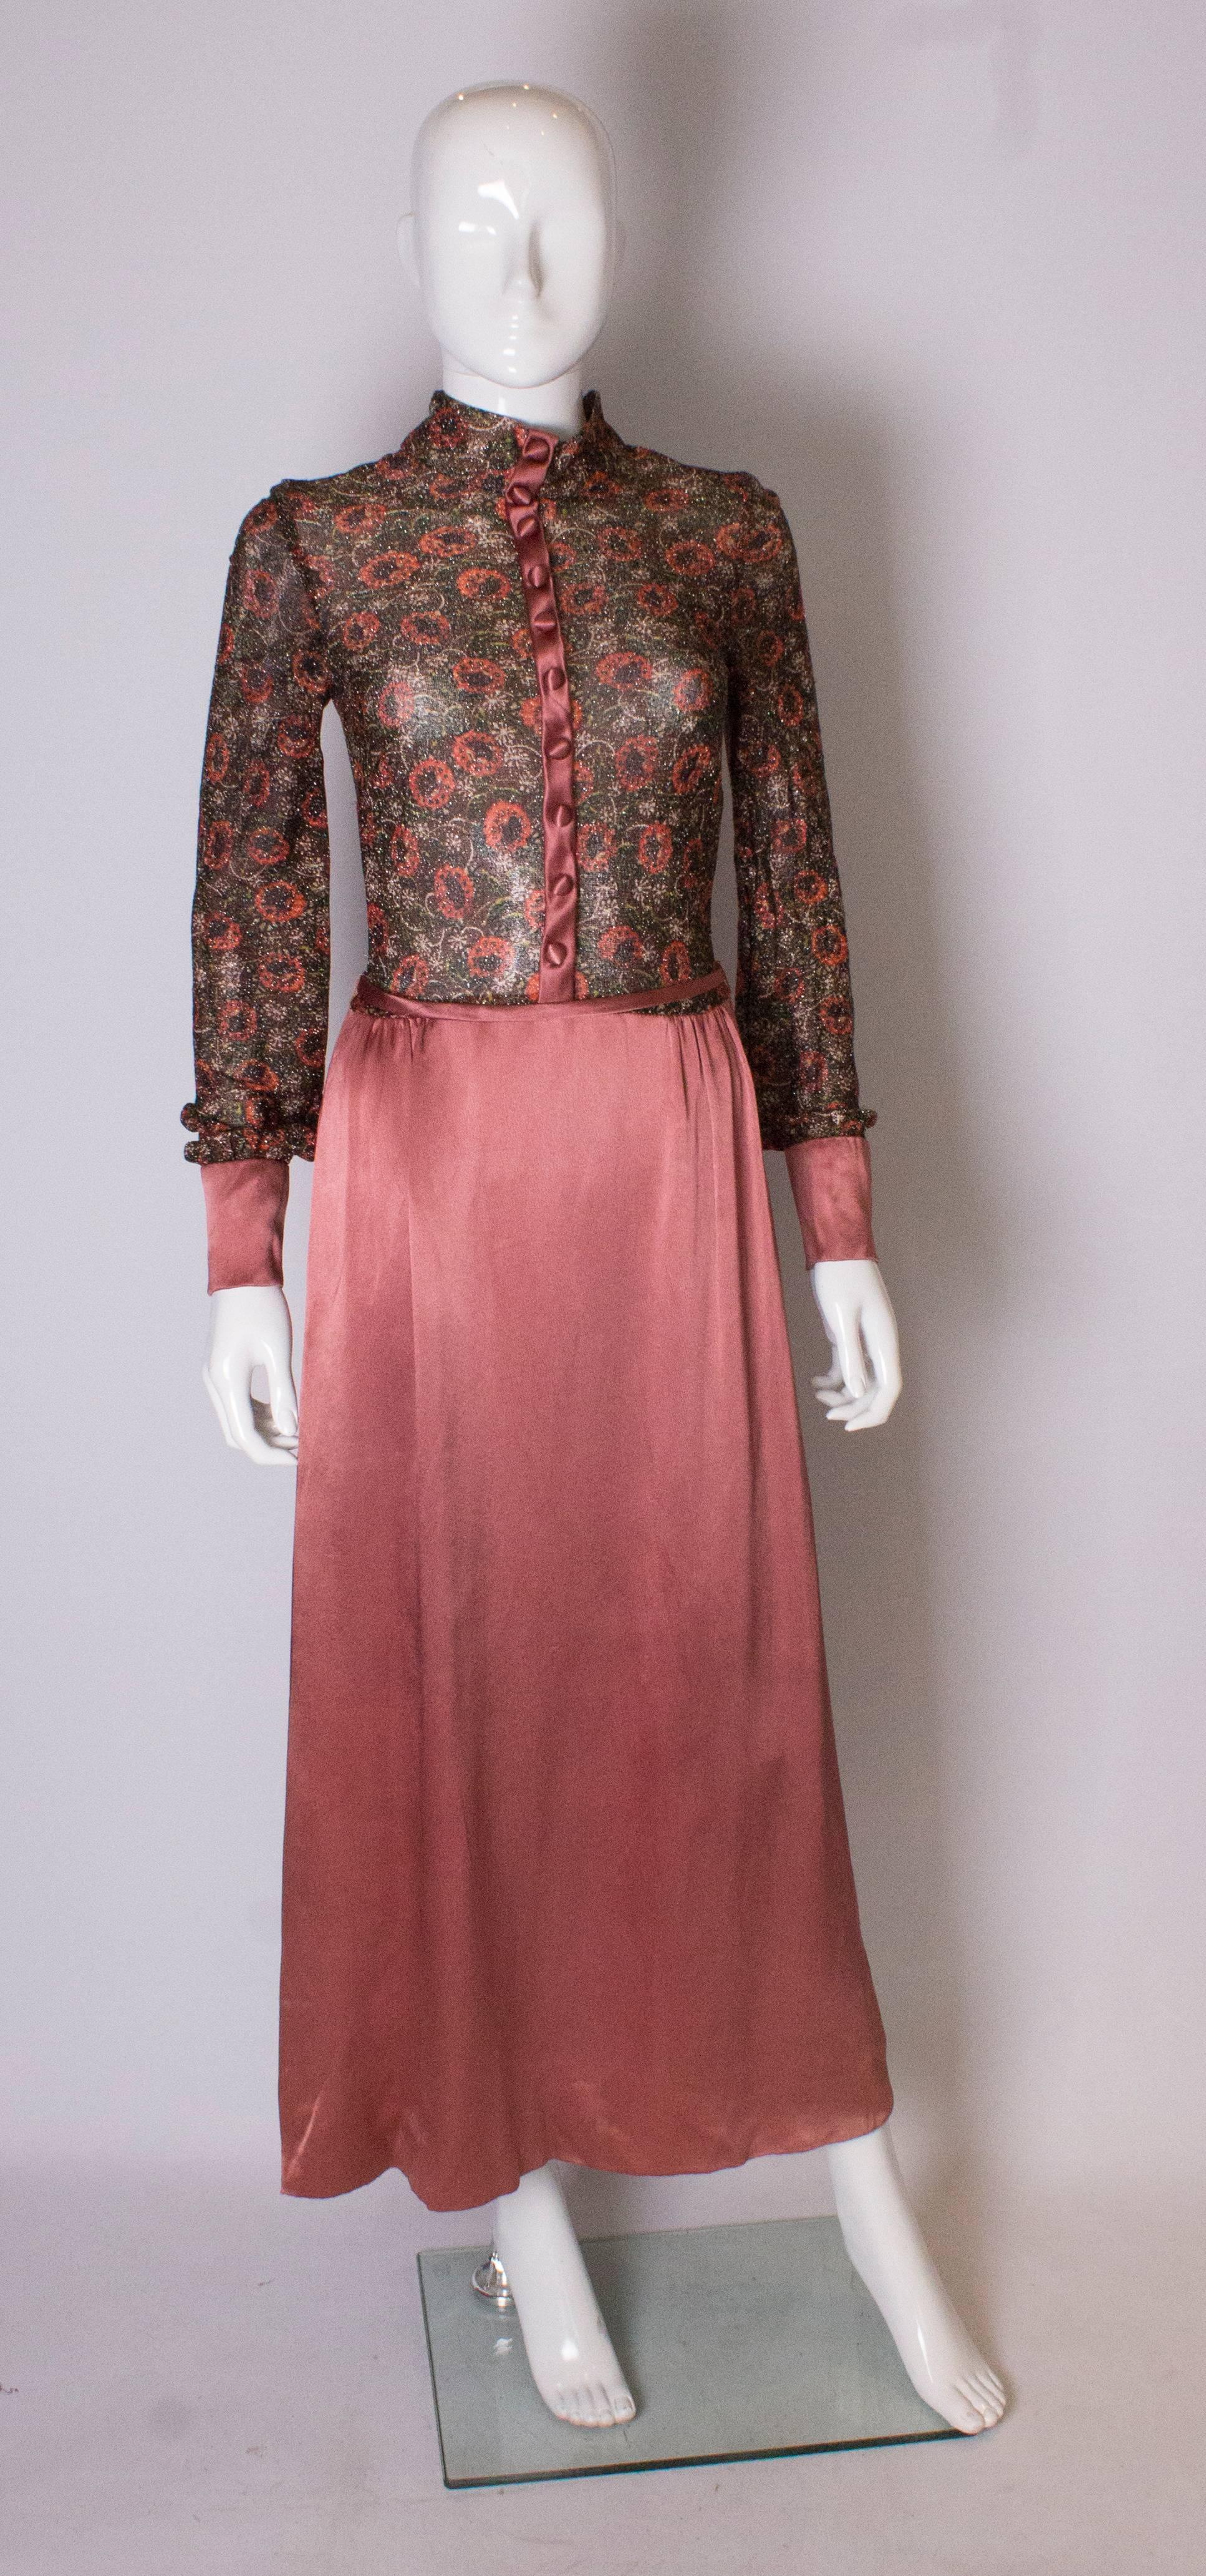 A stunning 1970s gown by Jean Varon. The upper part is a rusty gold colour lurex with a floral design. The lower skirt area is a dusty pink colour. The dress has wide cuffs with four buttons and there are ten decorative covered buttons on the front.